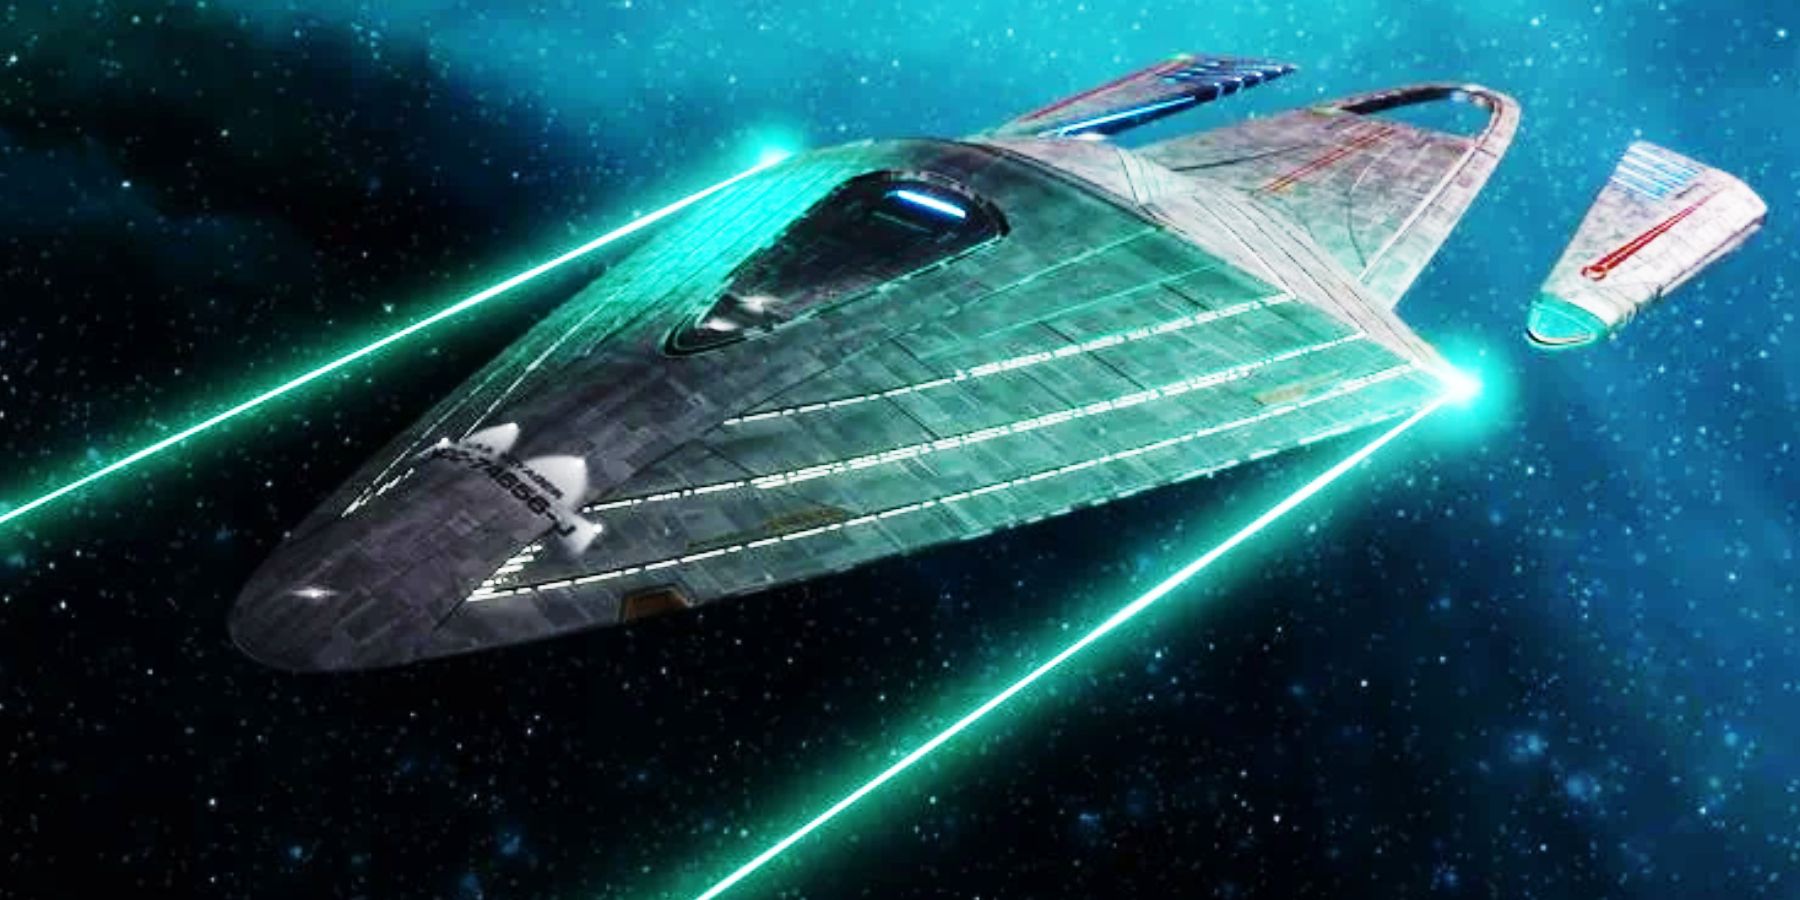 The USS Voyager-J firing green phasers